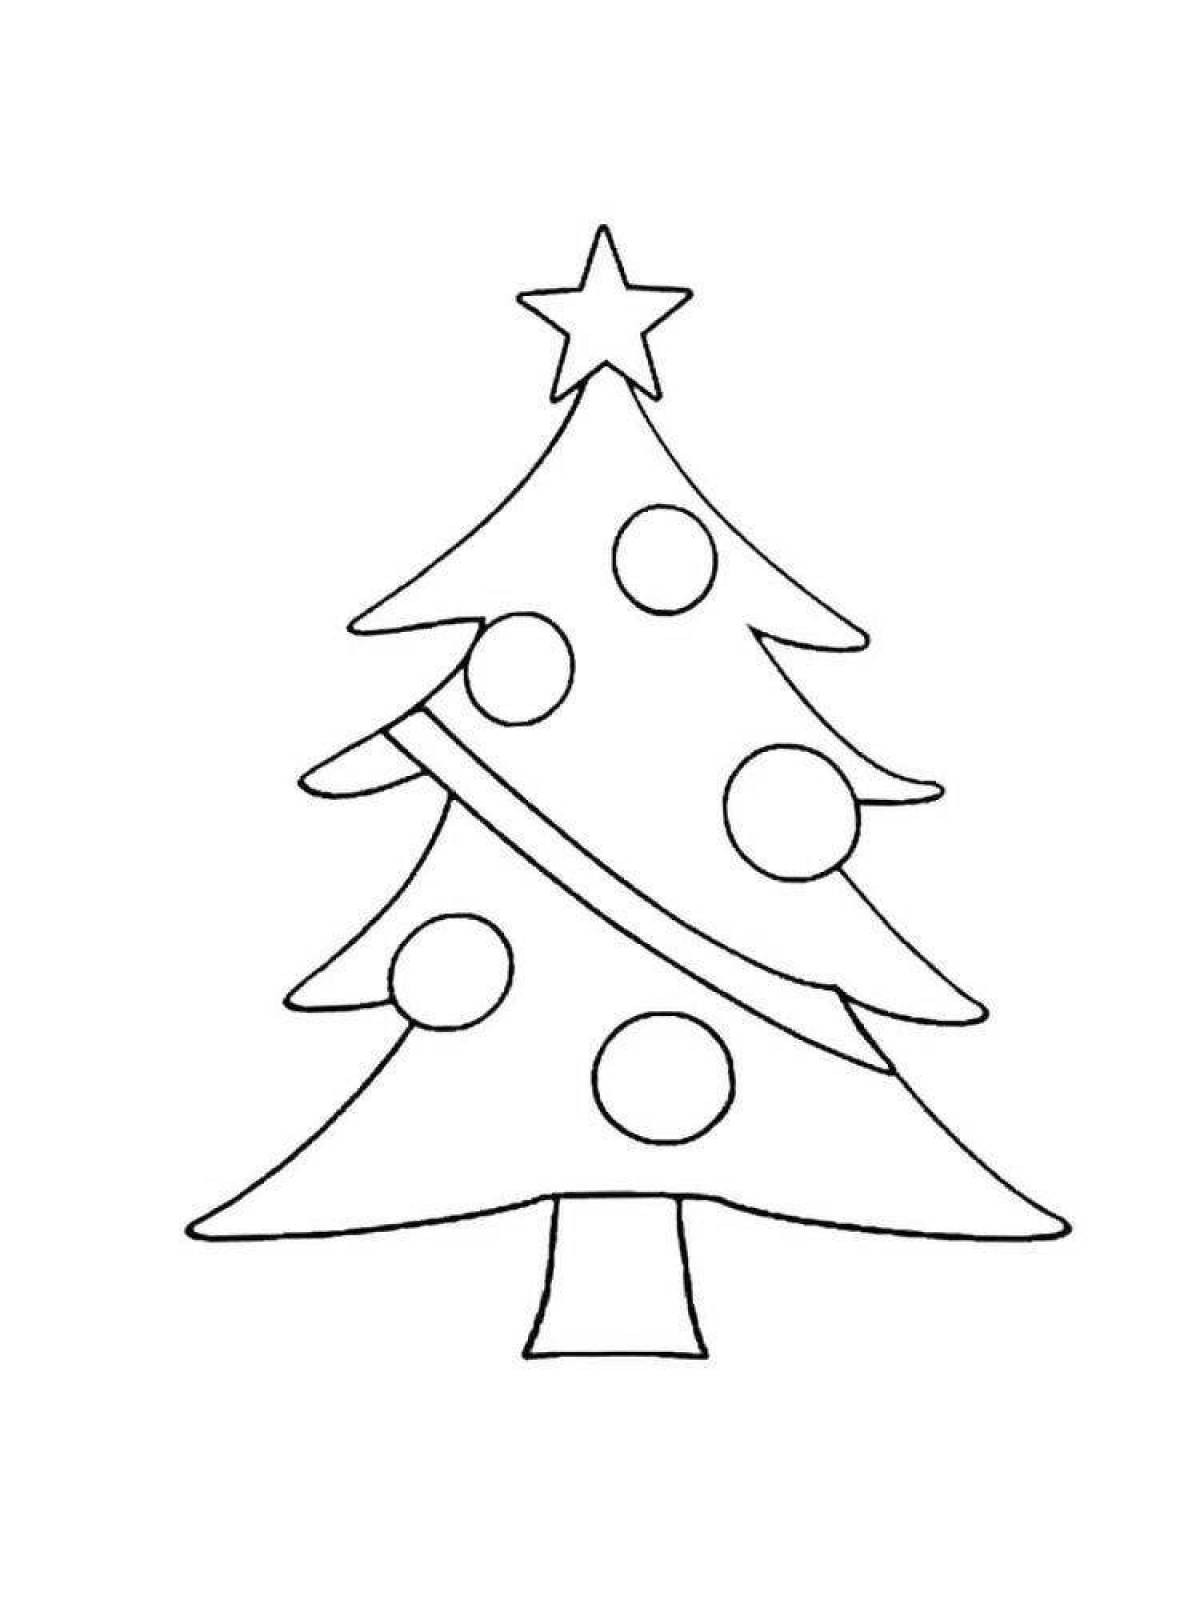 Amazing Christmas tree coloring template